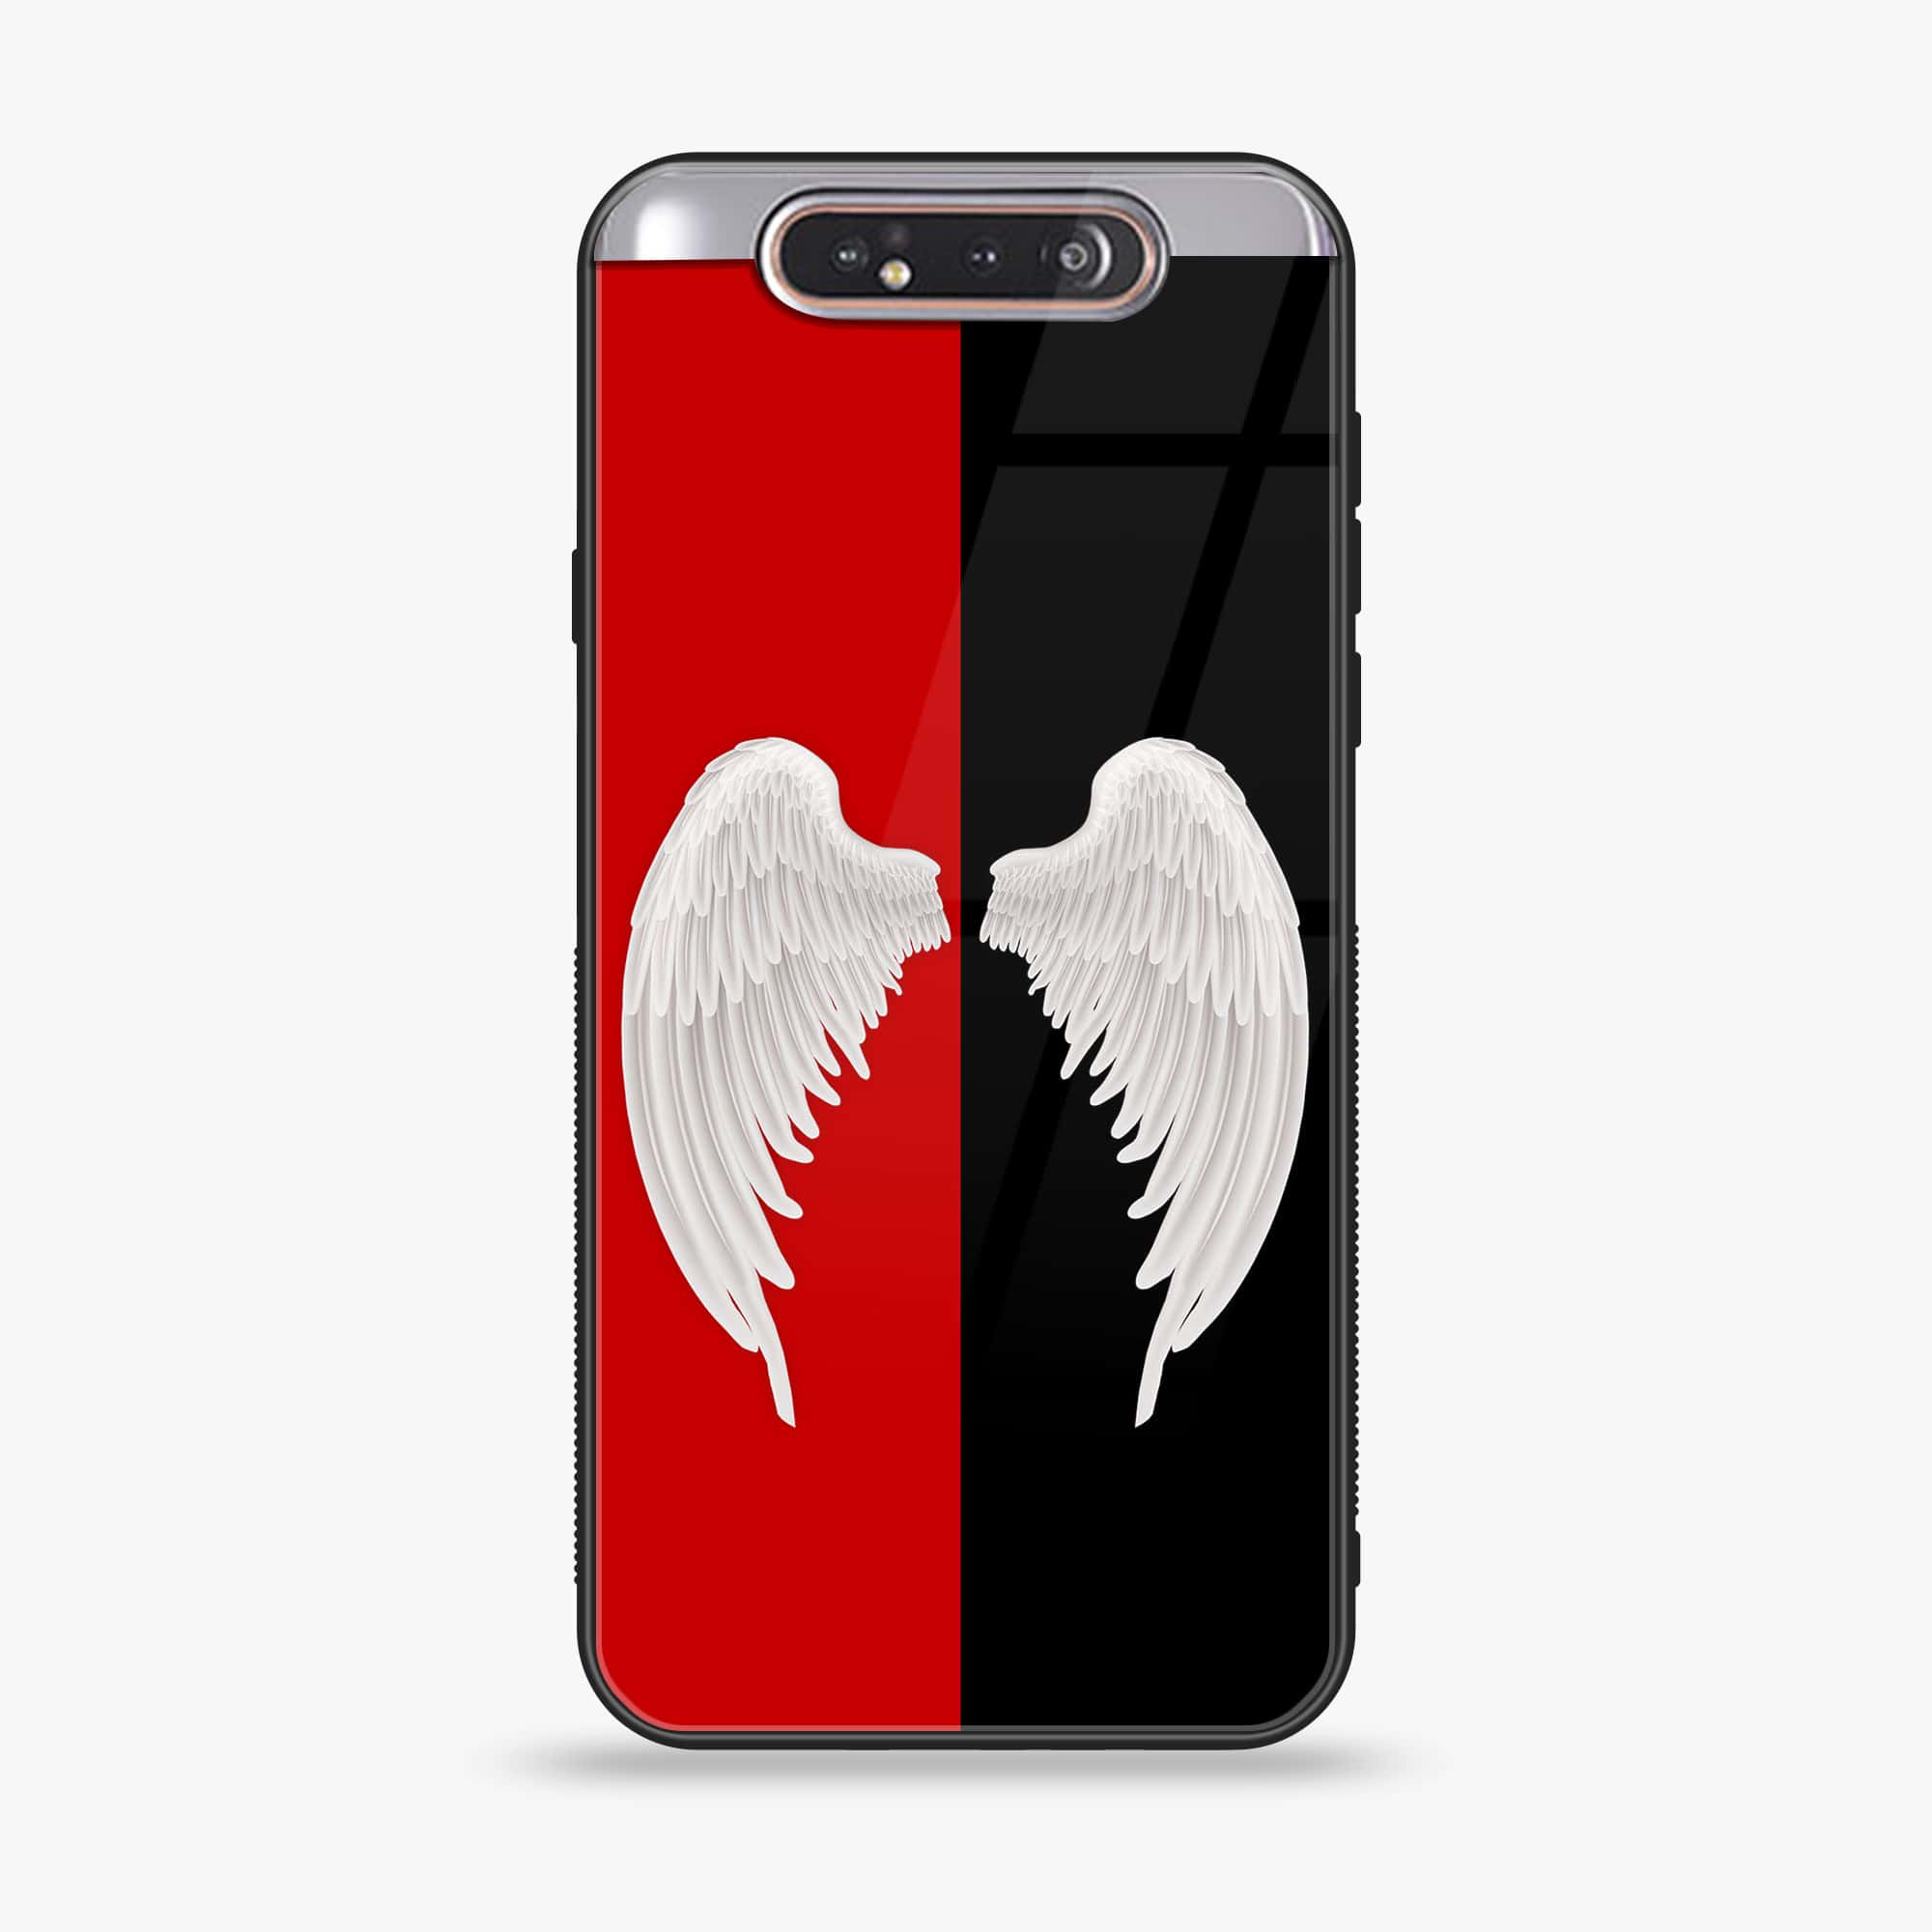 Samsung Galaxy A80 - Angel Wings 2.0 Series - Premium Printed Glass soft Bumper shock Proof Case